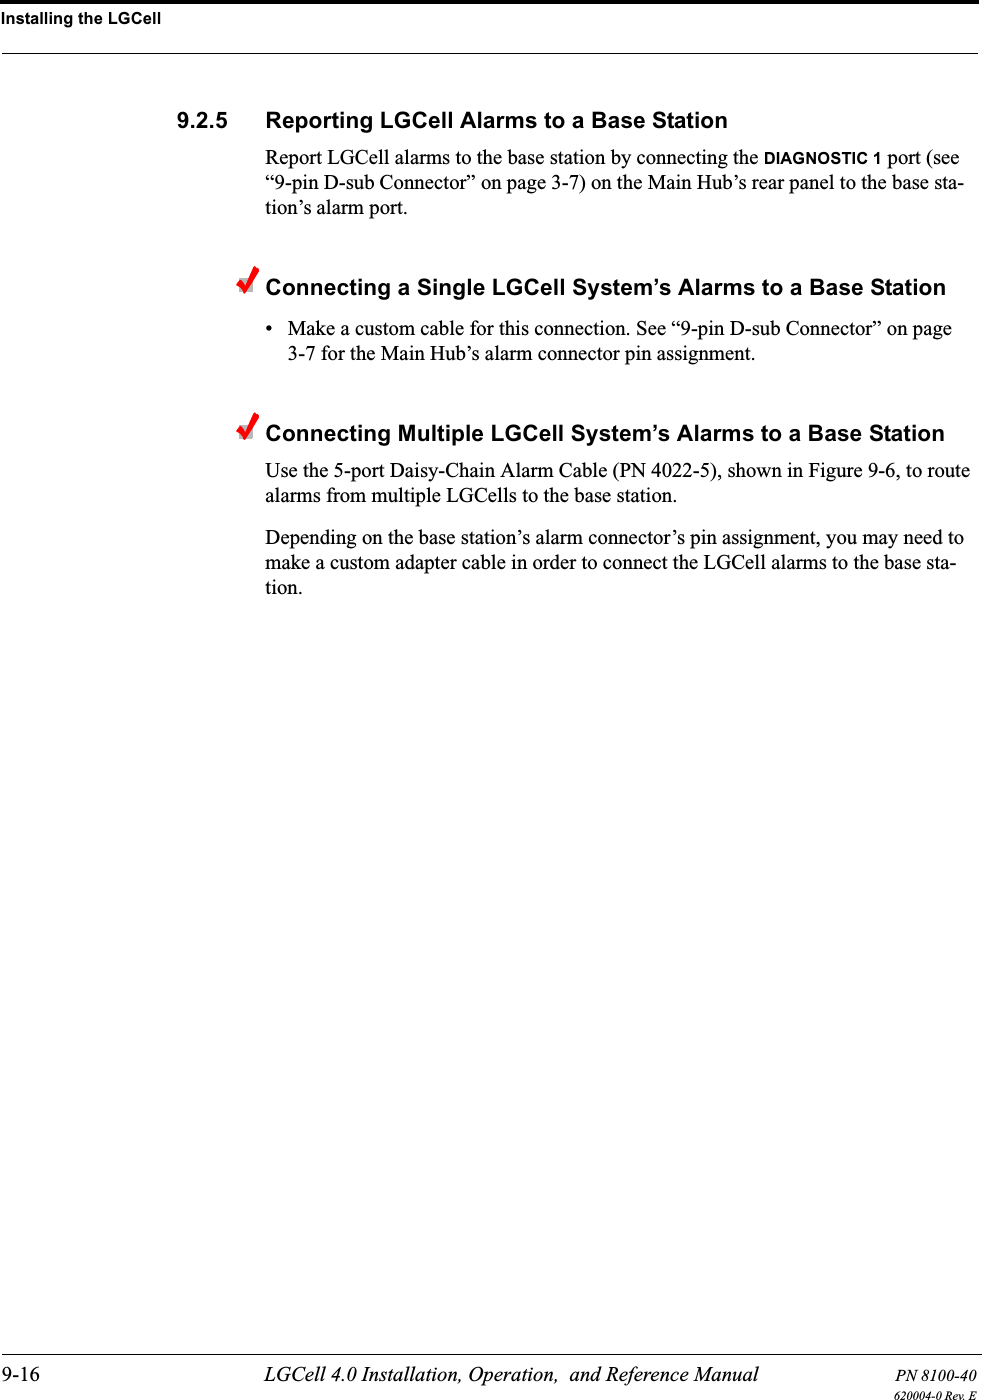 Installing the LGCell9-16 LGCell 4.0 Installation, Operation,  and Reference Manual PN 8100-40620004-0 Rev. E9.2.5 Reporting LGCell Alarms to a Base StationReport LGCell alarms to the base station by connecting the DIAGNOSTIC 1 port (see “9-pin D-sub Connector” on page 3-7) on the Main Hub’s rear panel to the base sta-tion’s alarm port.Connecting a Single LGCell System’s Alarms to a Base Station• Make a custom cable for this connection. See “9-pin D-sub Connector” on page 3-7 for the Main Hub’s alarm connector pin assignment.Connecting Multiple LGCell System’s Alarms to a Base StationUse the 5-port Daisy-Chain Alarm Cable (PN 4022-5), shown in Figure 9-6, to route alarms from multiple LGCells to the base station.Depending on the base station’s alarm connector’s pin assignment, you may need to make a custom adapter cable in order to connect the LGCell alarms to the base sta-tion.